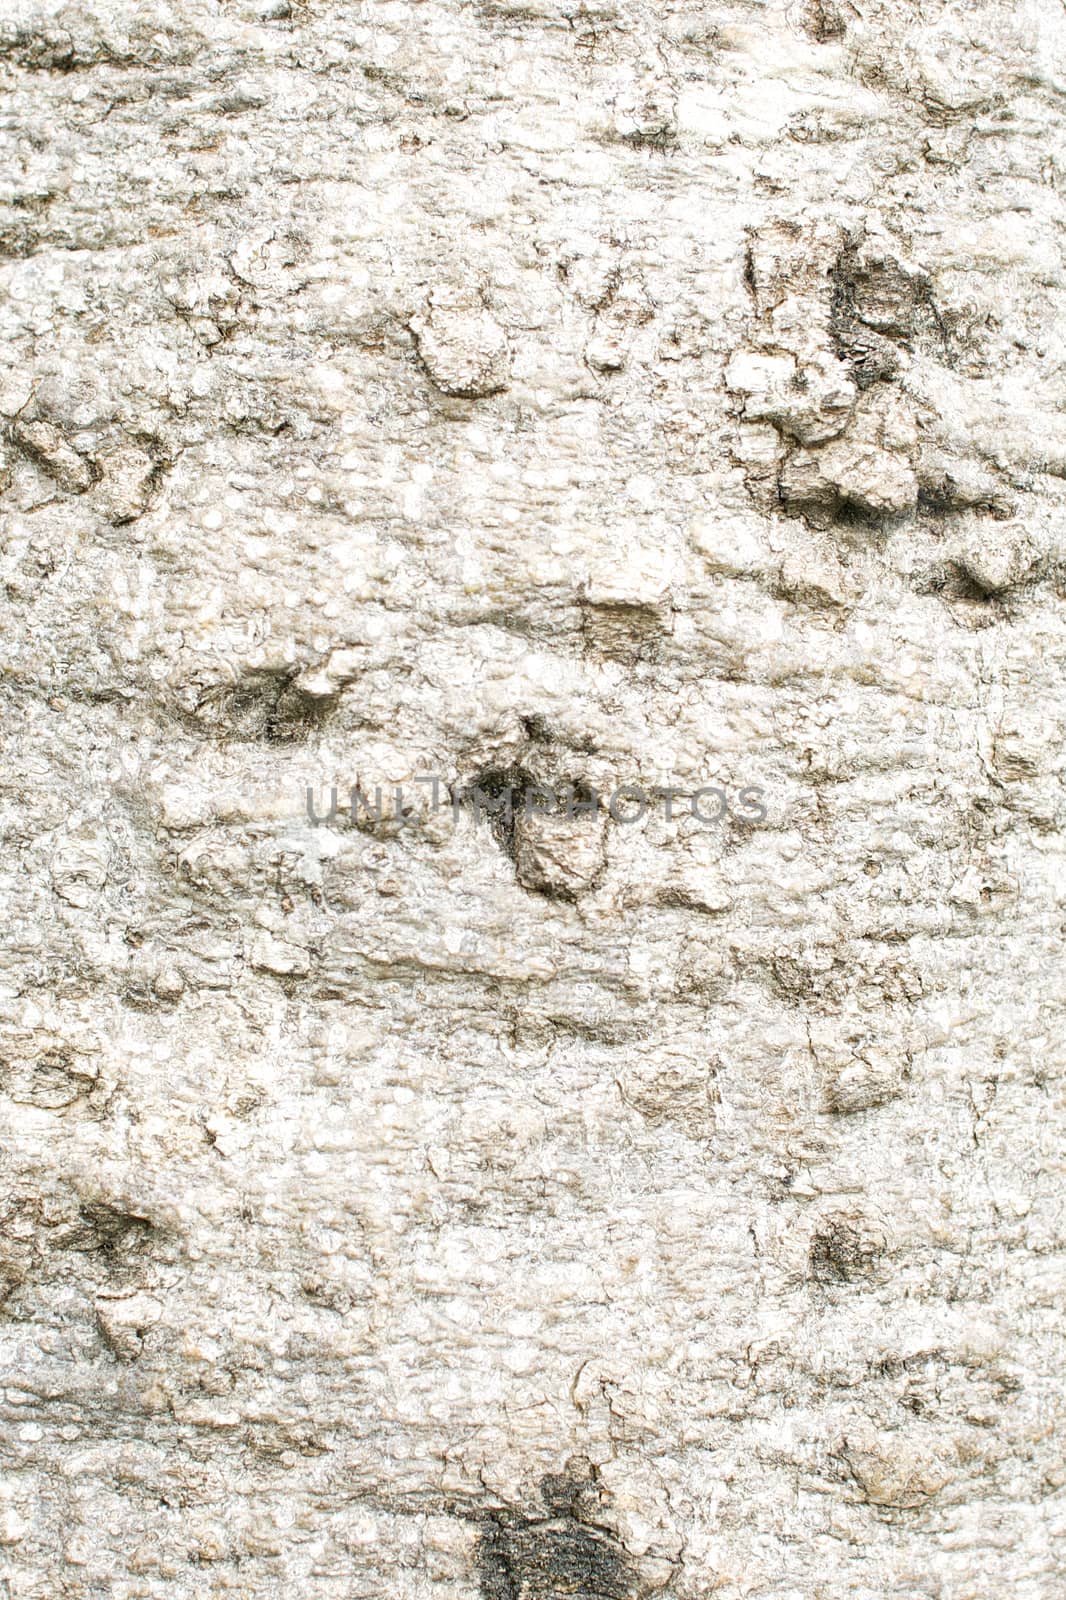 Bark of Crateva adansonii in forest use as background or texture.